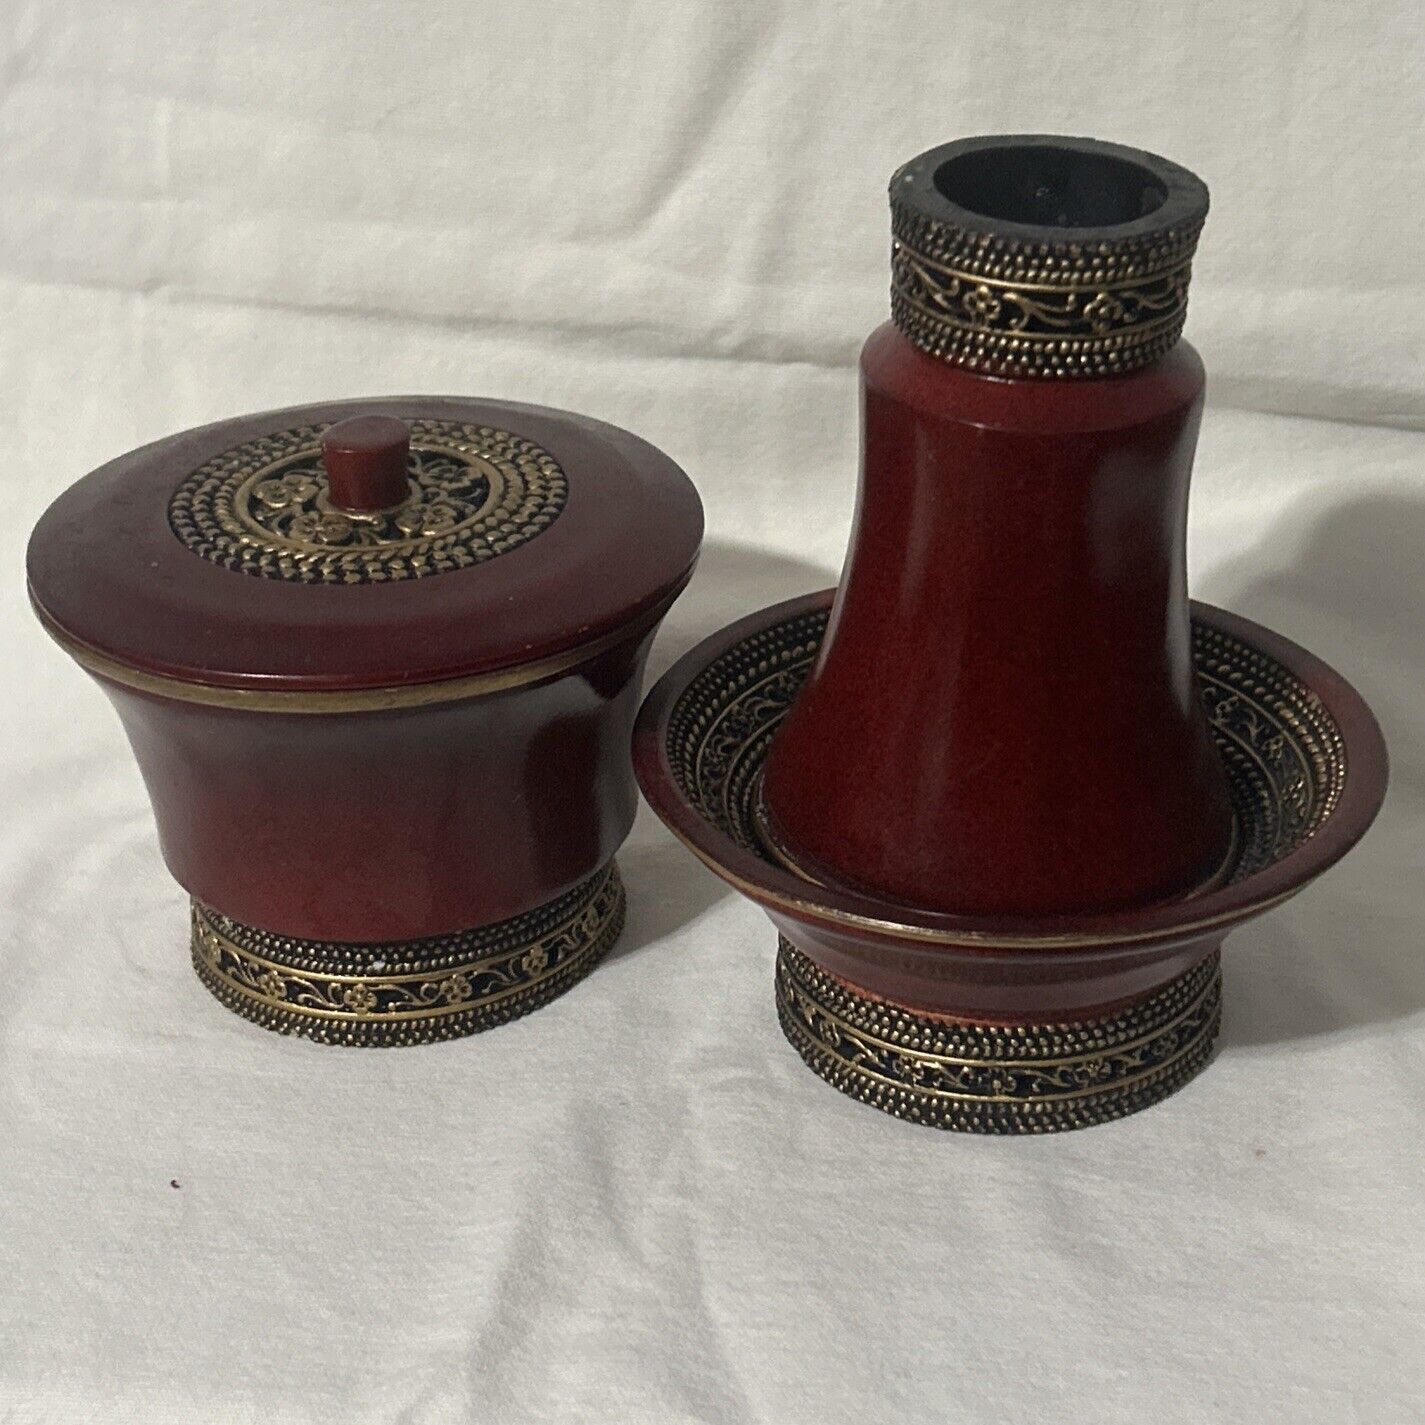 Vintage Dresser Jar, Cup, & Stand Set Of 3 Burgundy With Gold Gilded Accents